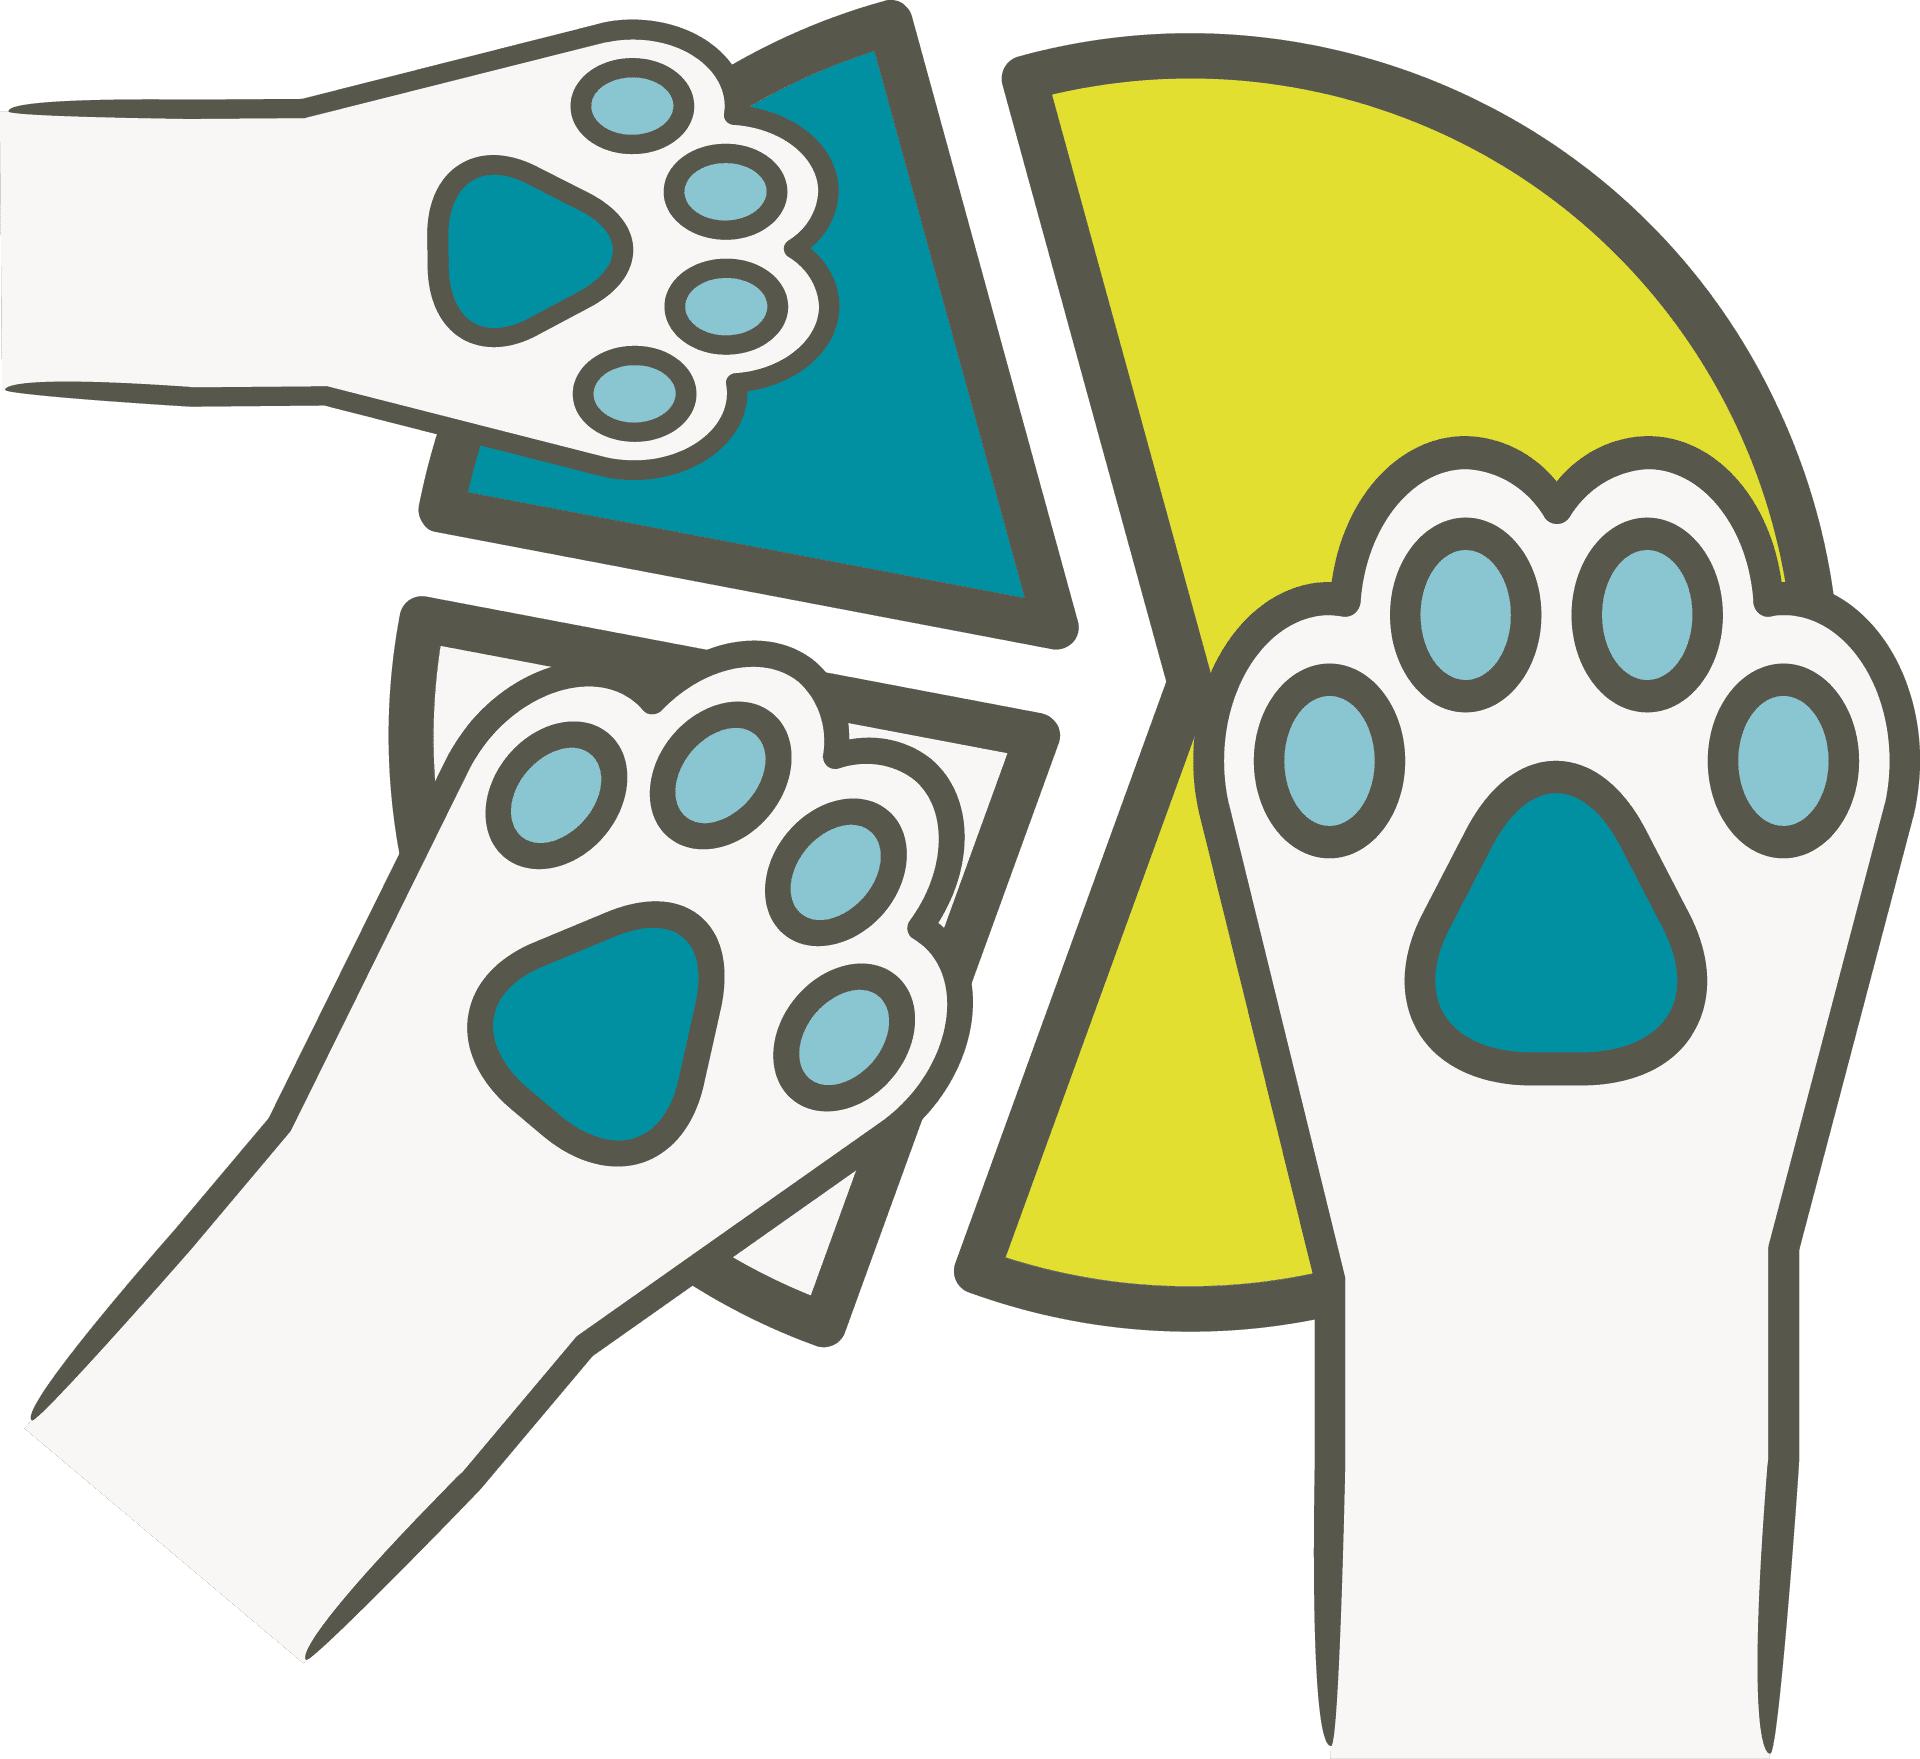 Three cartoon dog paws rest on top of parts of a pie chart.